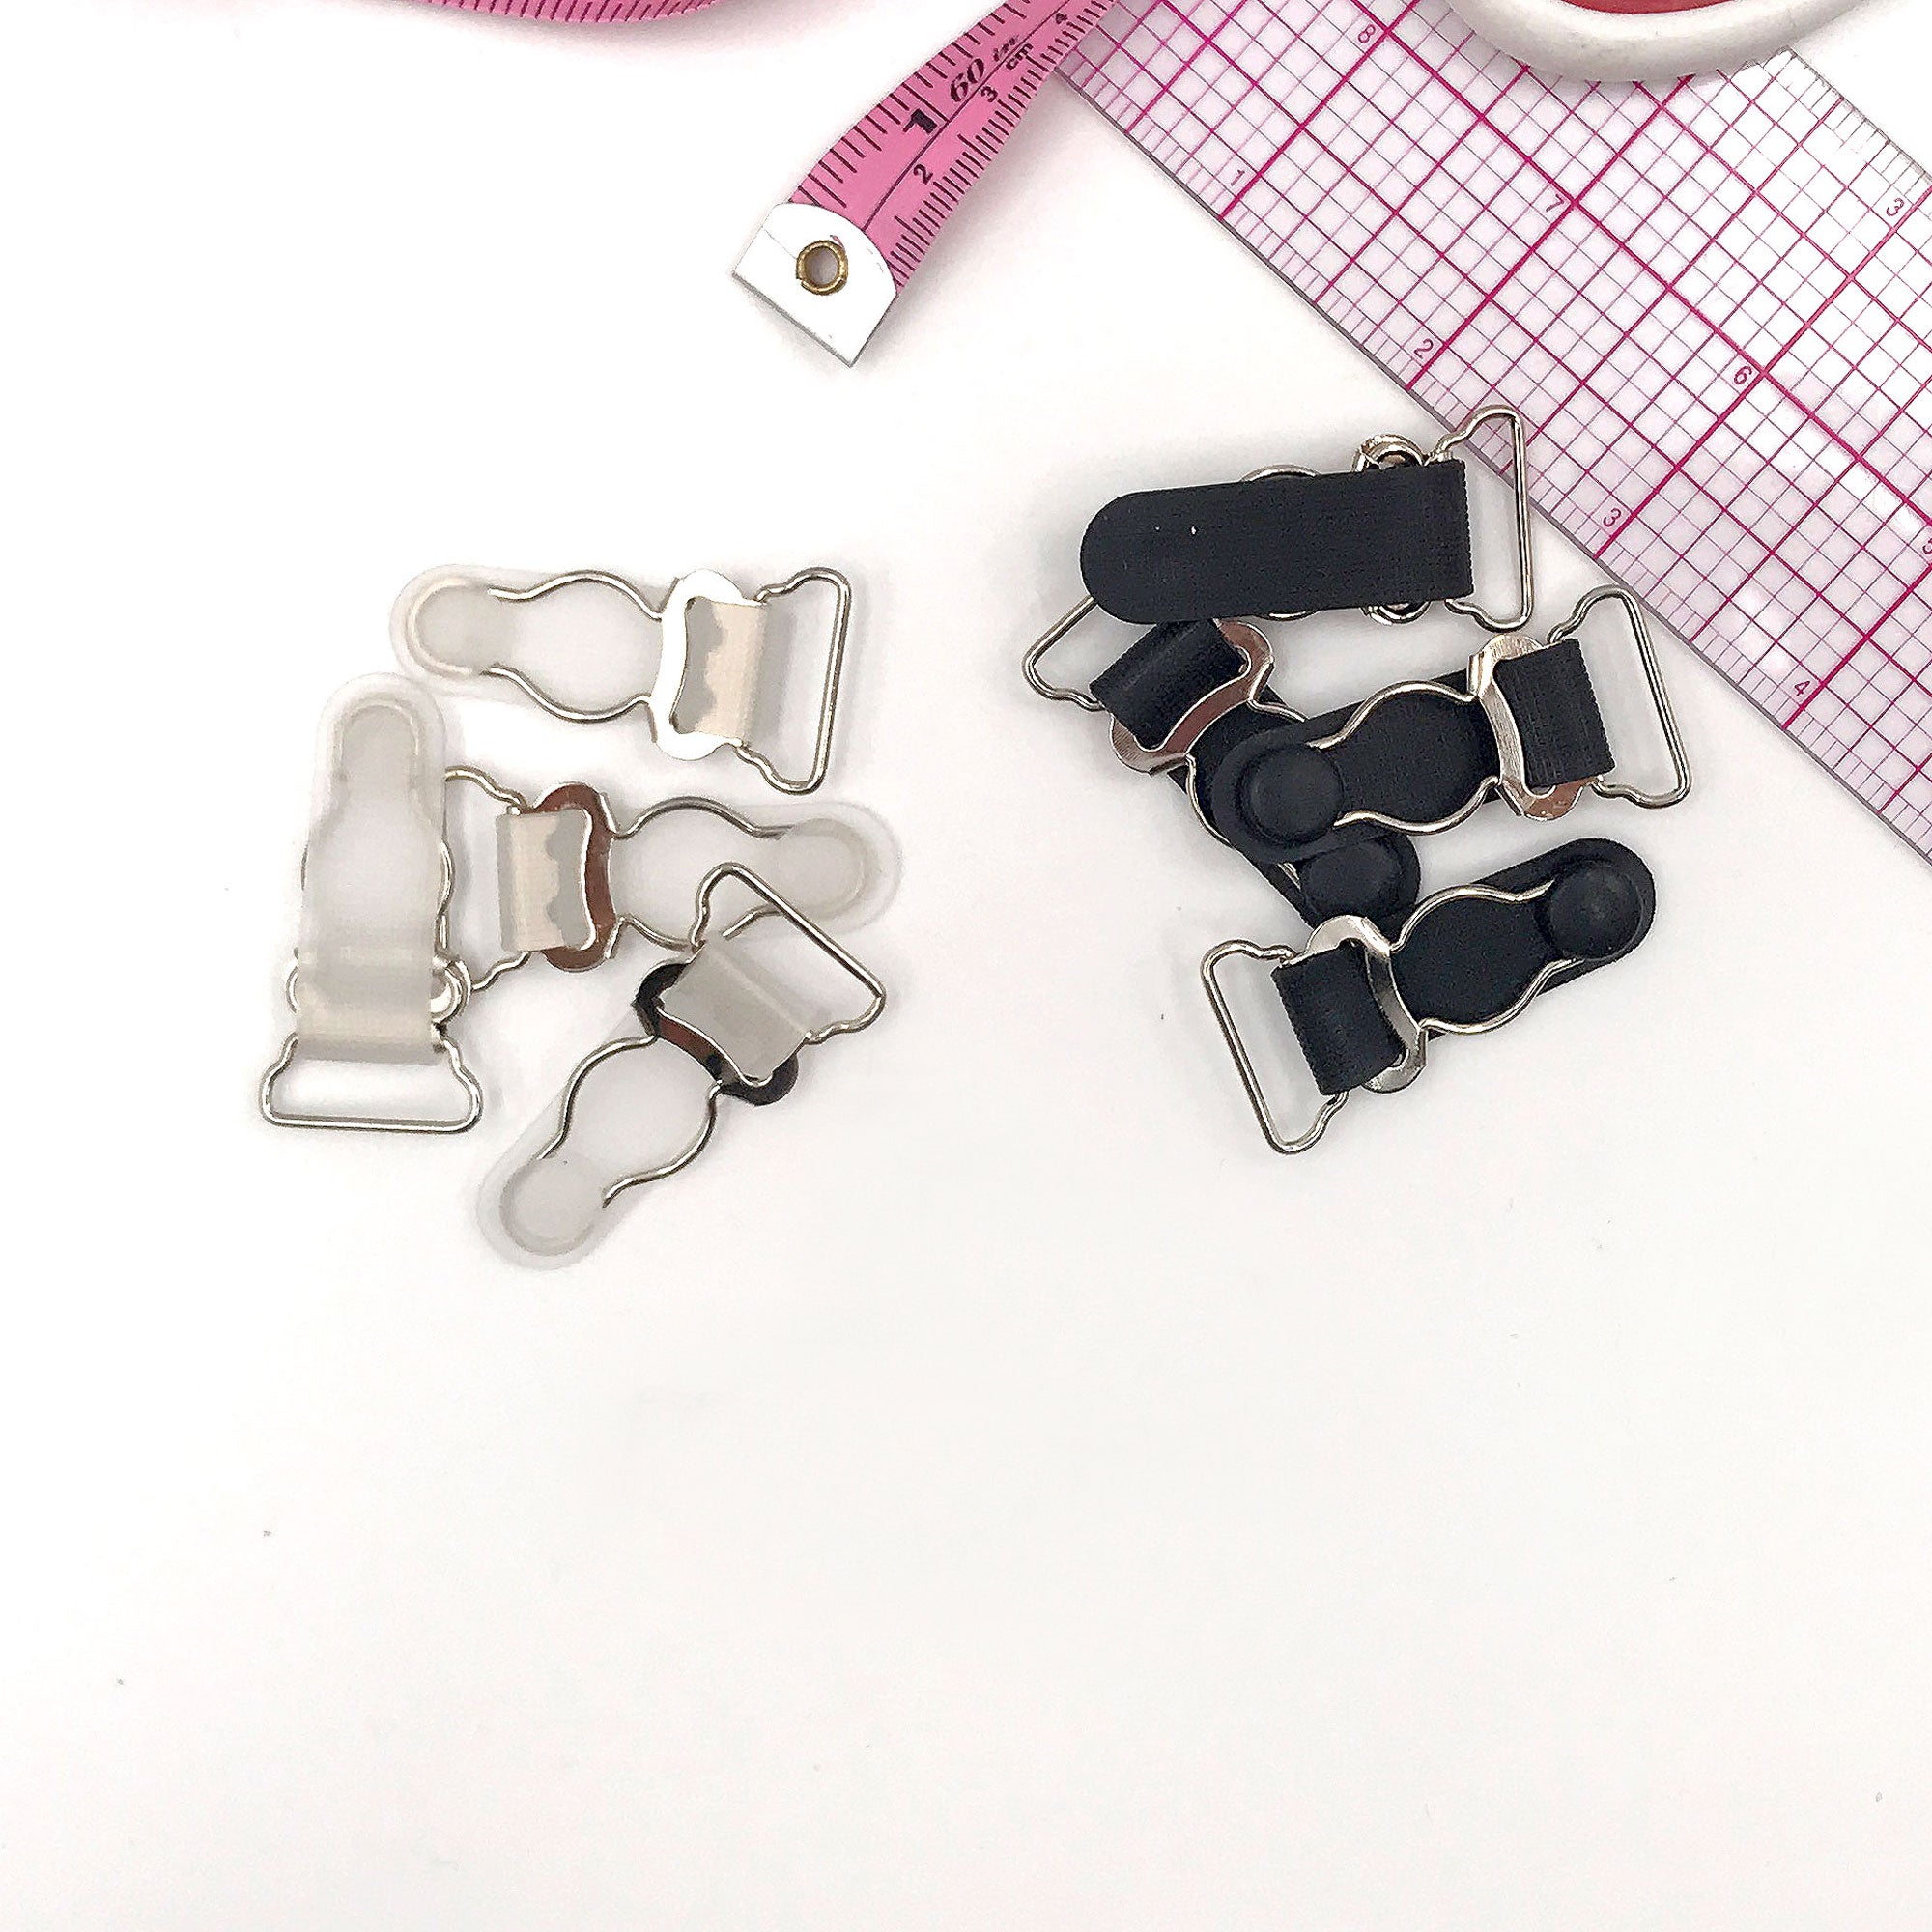 3/4" (20mm) Garter Clips for Lingerie in Clear/Silver or Black/Silver - Set of 4 - Stitch Love Studio